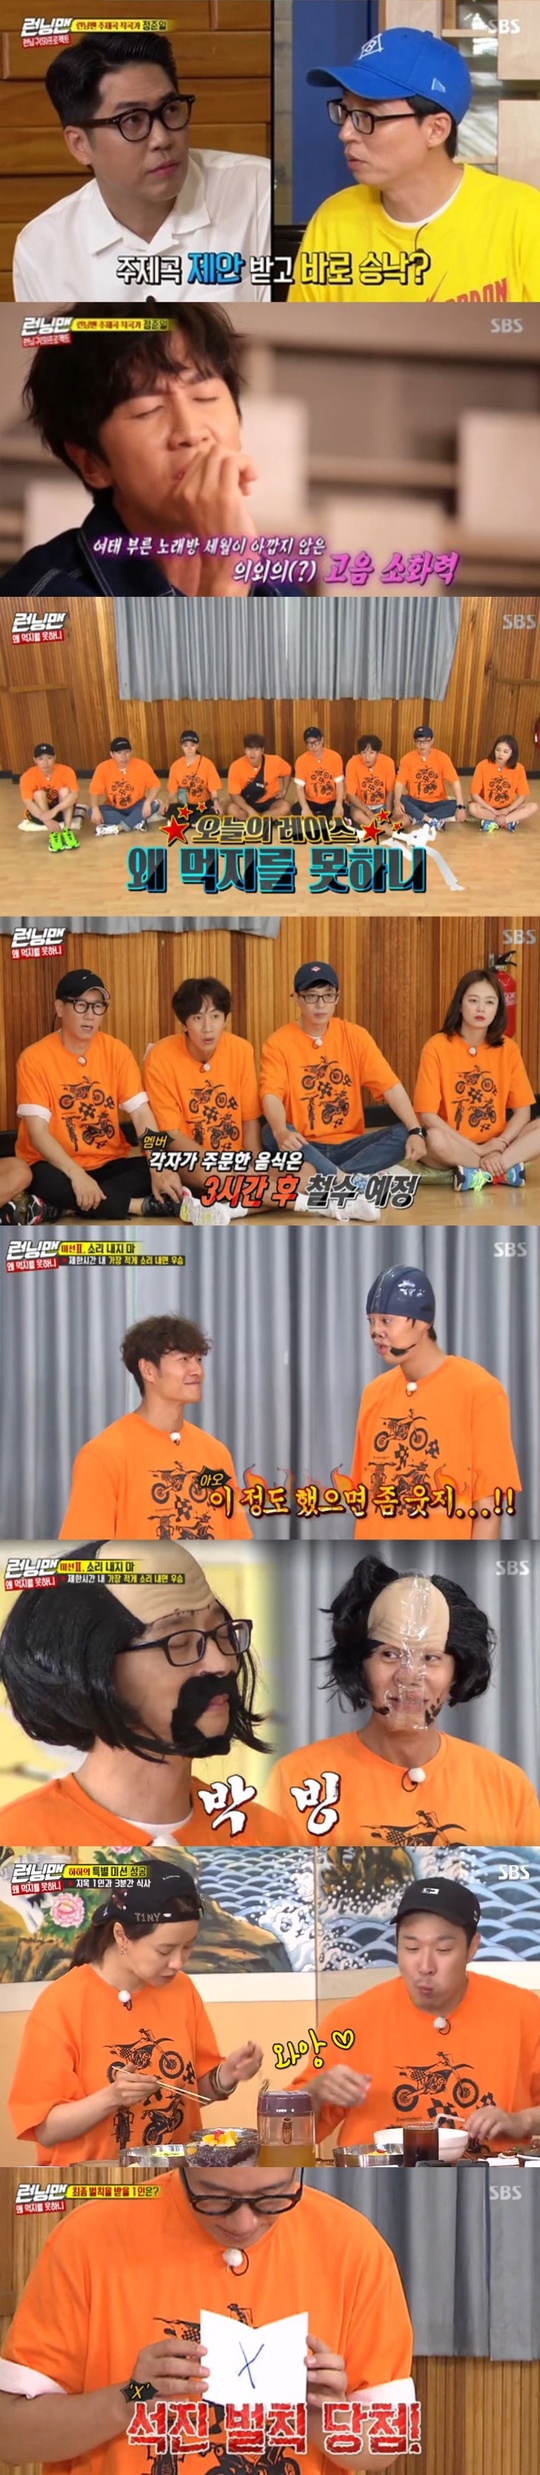 SBS Running Man took the top spot in the same time zone of 2049 Target Viewpoint, which was solid during the holiday season.According to Nielsen Korea, the ratings agency Running Man, which aired on August 4, soared to 7.4% of the highest audience rating per minute, and the 2049 target audience rating, an important indicator of major advertising officials, recorded 3.1% (based on the second part of the audience rating of households in the metropolitan area), beating both Masked Wang and Donkey Ears.On the day of the broadcast, singer Jeong Joon-Il, who will be a composer of the theme song Running Man, appeared.Jeong Joon-Il released his first melody line to the members, saying, I liked Running Man and accepted it right when I received the theme song proposal.The members cheered, saying, Its really good, and raised expectations for the theme song Running Man, which will be combined with the members lyrics.In addition, on the day of the broadcast, Why can not I eat Race was also conducted.It was a mission that only needed to eat the food in front of it for a long time, but as the fate was decided by the Bokbokbok card, a fierce food competition between the members was held.In particular, the second round mission, Do not Scream, should not be made, and the Makeup Show was held for a long time, and Choi Soo-in, who shines in the National Athletics Championship 2, participated in the event, making the members confused with his amazing running skills.Meanwhile, Haha and Song Ji-hyo succeeded in eating as a result of the race final, and this scene was the highest audience rating of 7.4% per minute, which was the best one minute.Ji Seok-jin won the penalty and will perform a makeup show when appearing as a guest at Running Man fan meeting Running District on August 26.bak-beauty